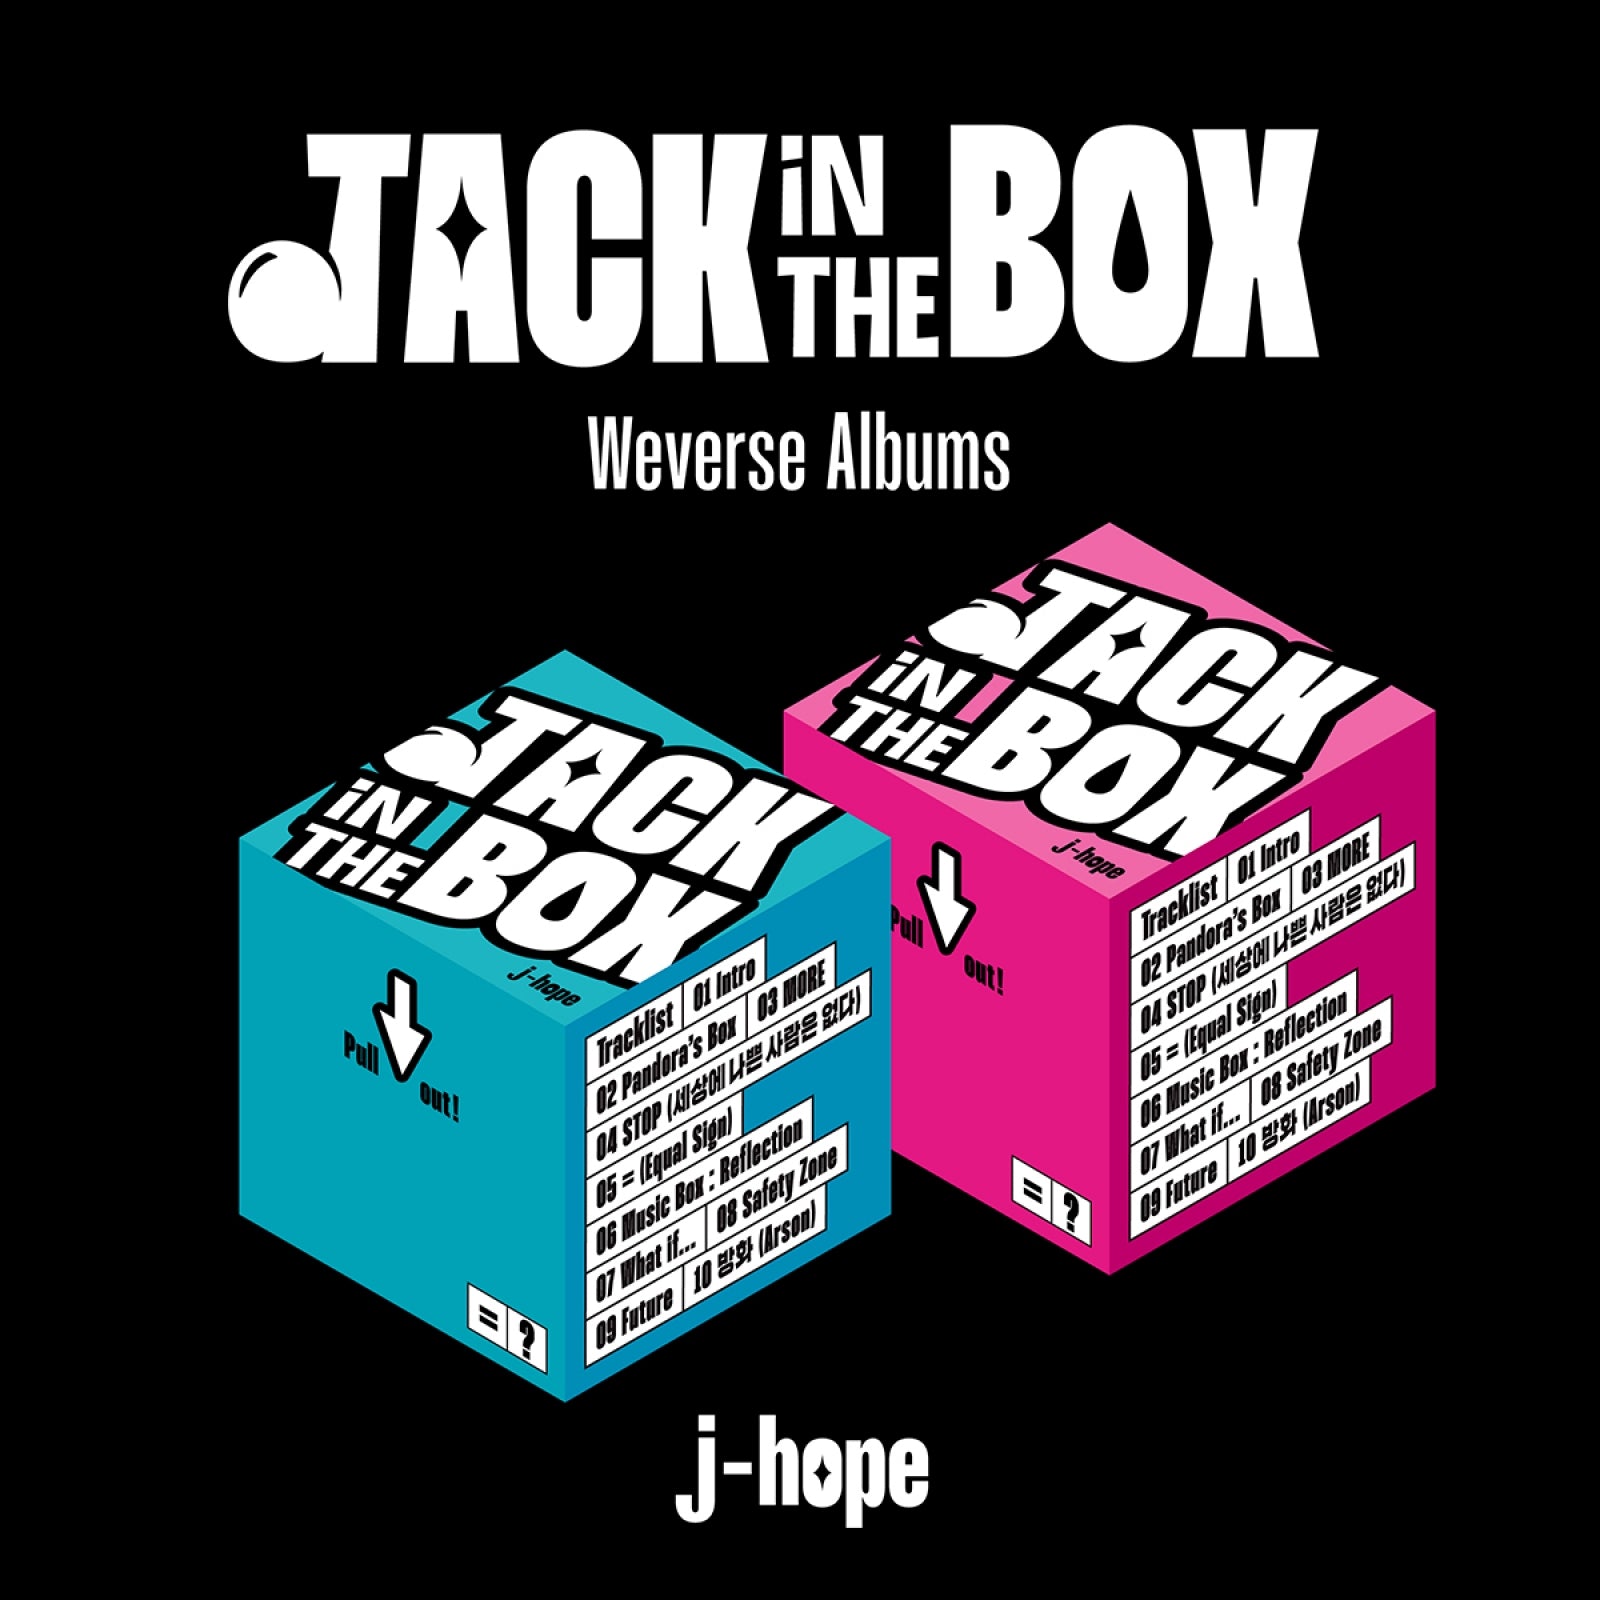 J-HOPE (BTS) - JACK IN THE BOX WEVERSE VER